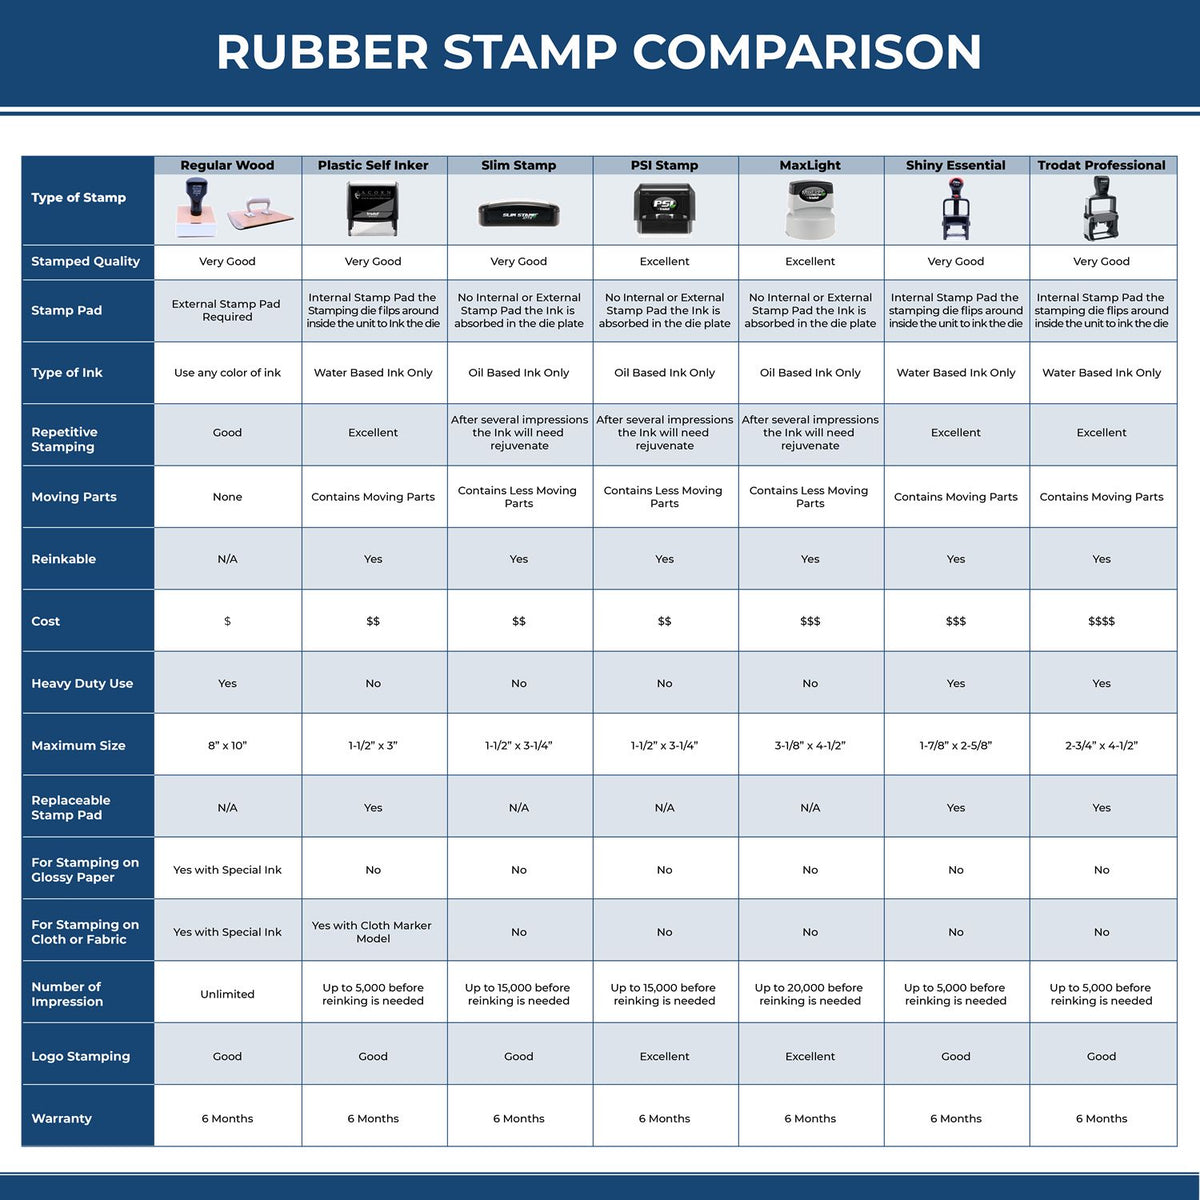 Global Express Guaranteed Rubber Stamp 4441R Rubber Stamp Comparison